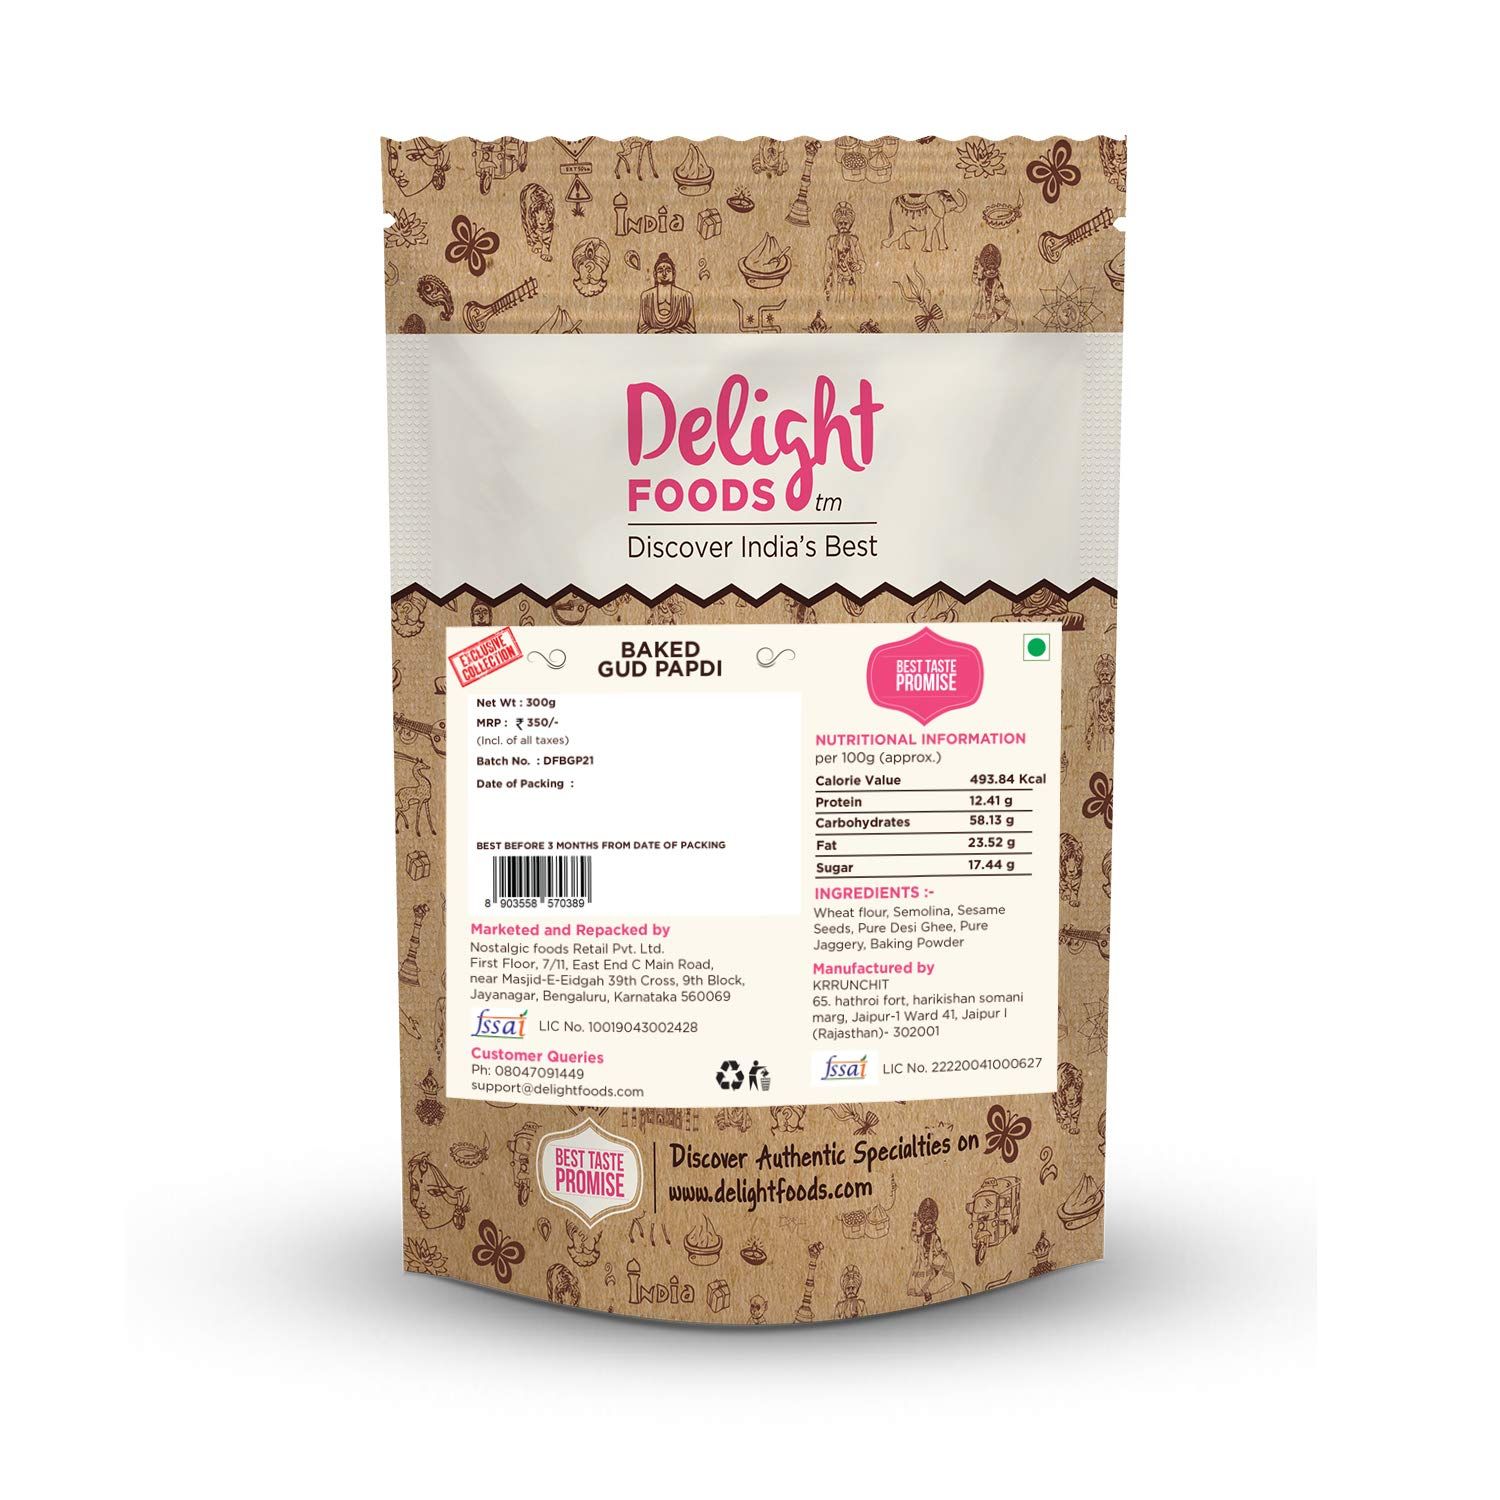 Delight Foods Baked Gud Papdi Image